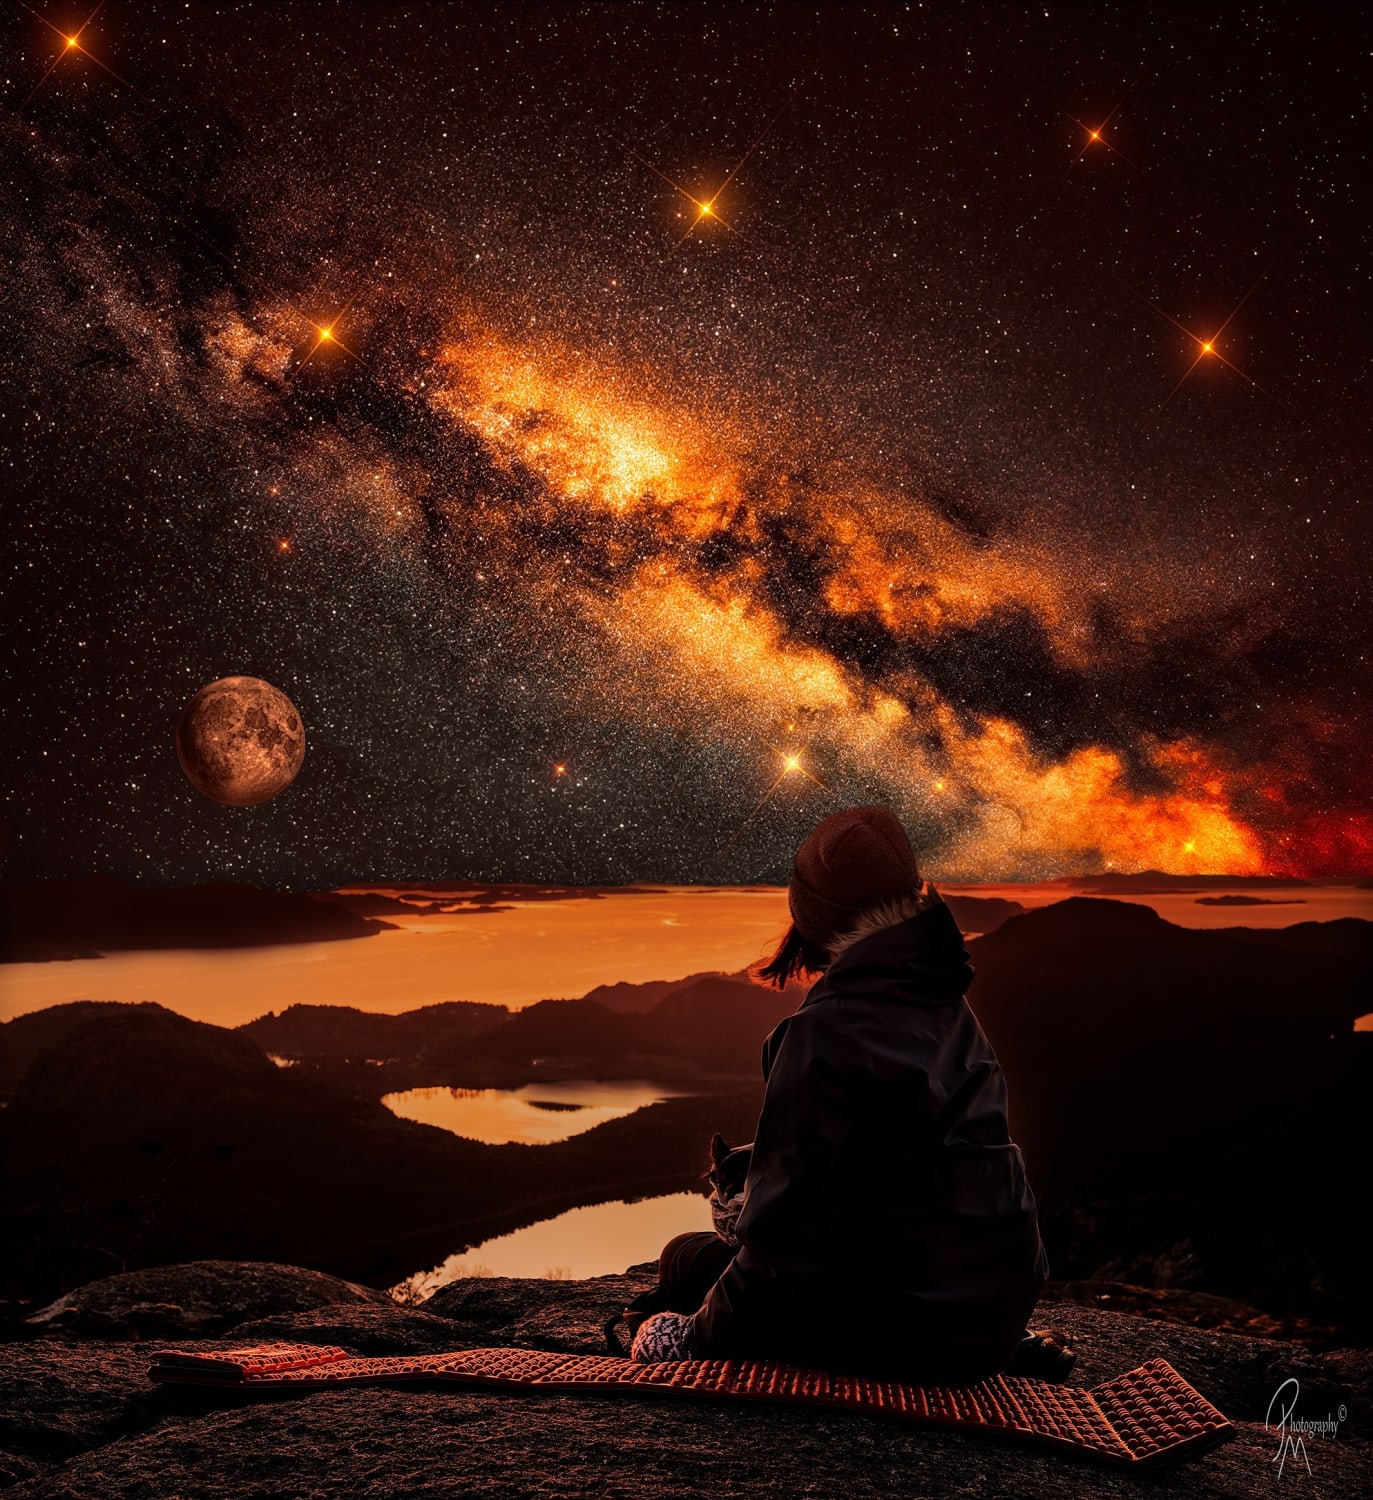 An astro composite i made consisting of a milkywayphoto (Tracked and stacked 10st 3min exposure + calibration frames, bortle 1) a moon photo (3000st tracked exposures + calibration frames, bortle 8 fml...) And a single long exposure picture of my girl during sunset on a mountain top.